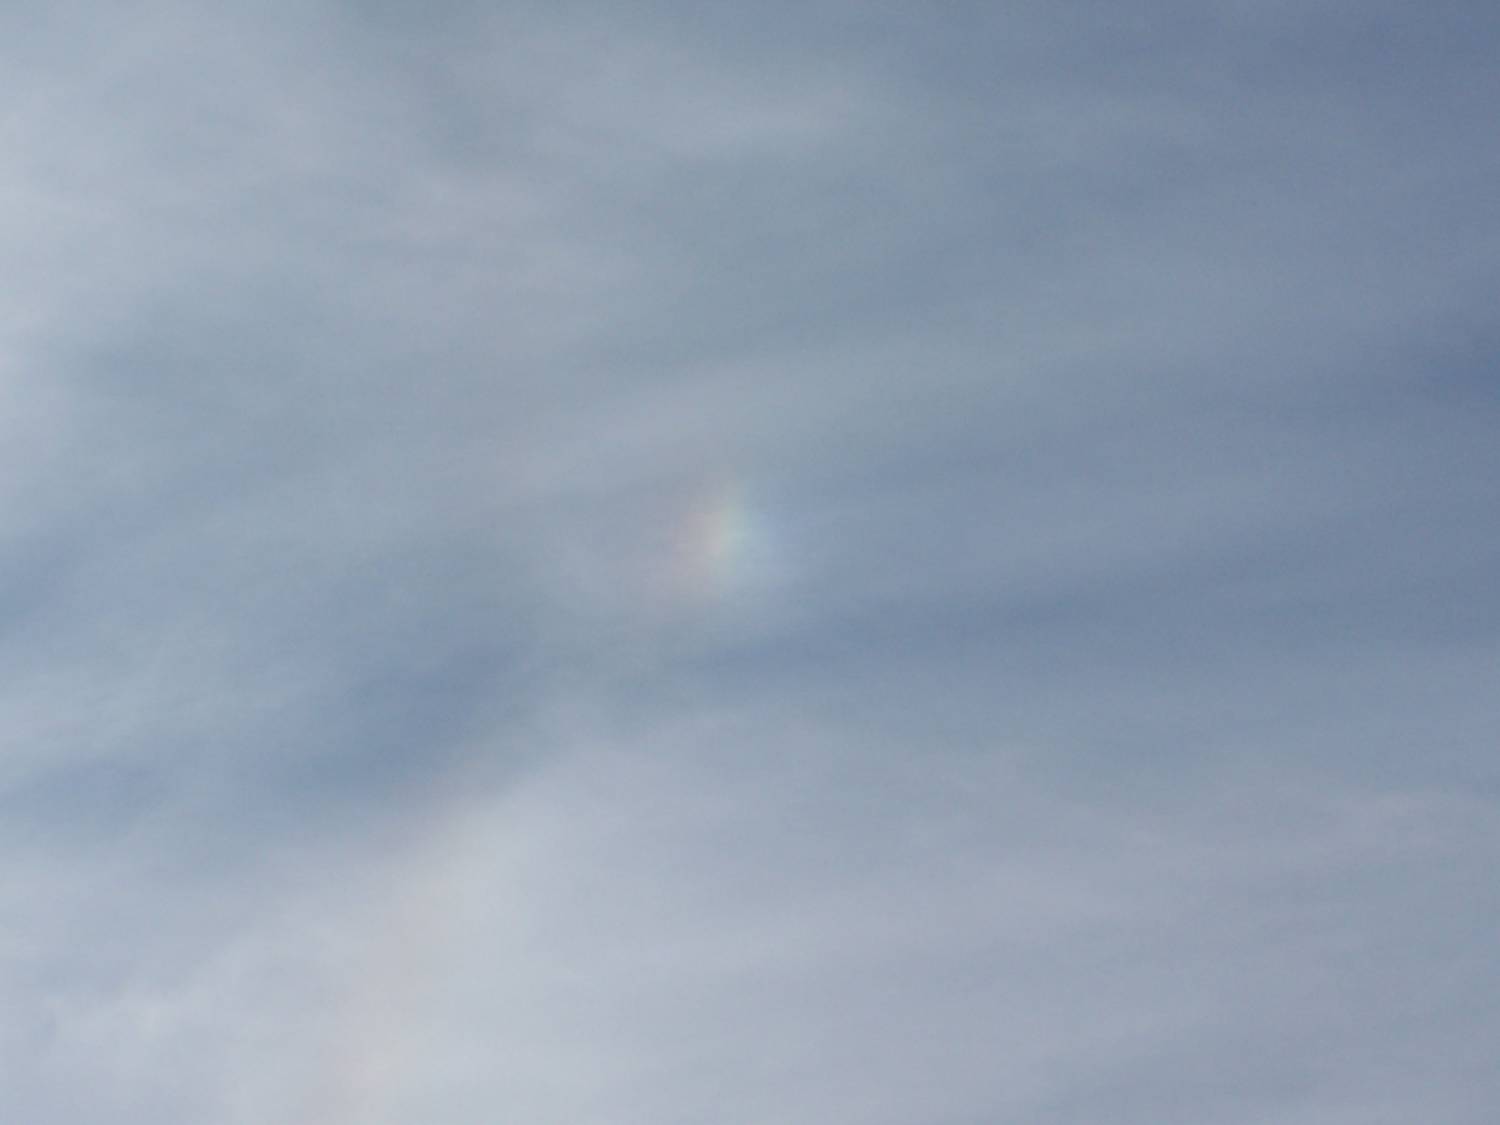 Solar circle with right sundog: 46 KB; click on the image to enlarge